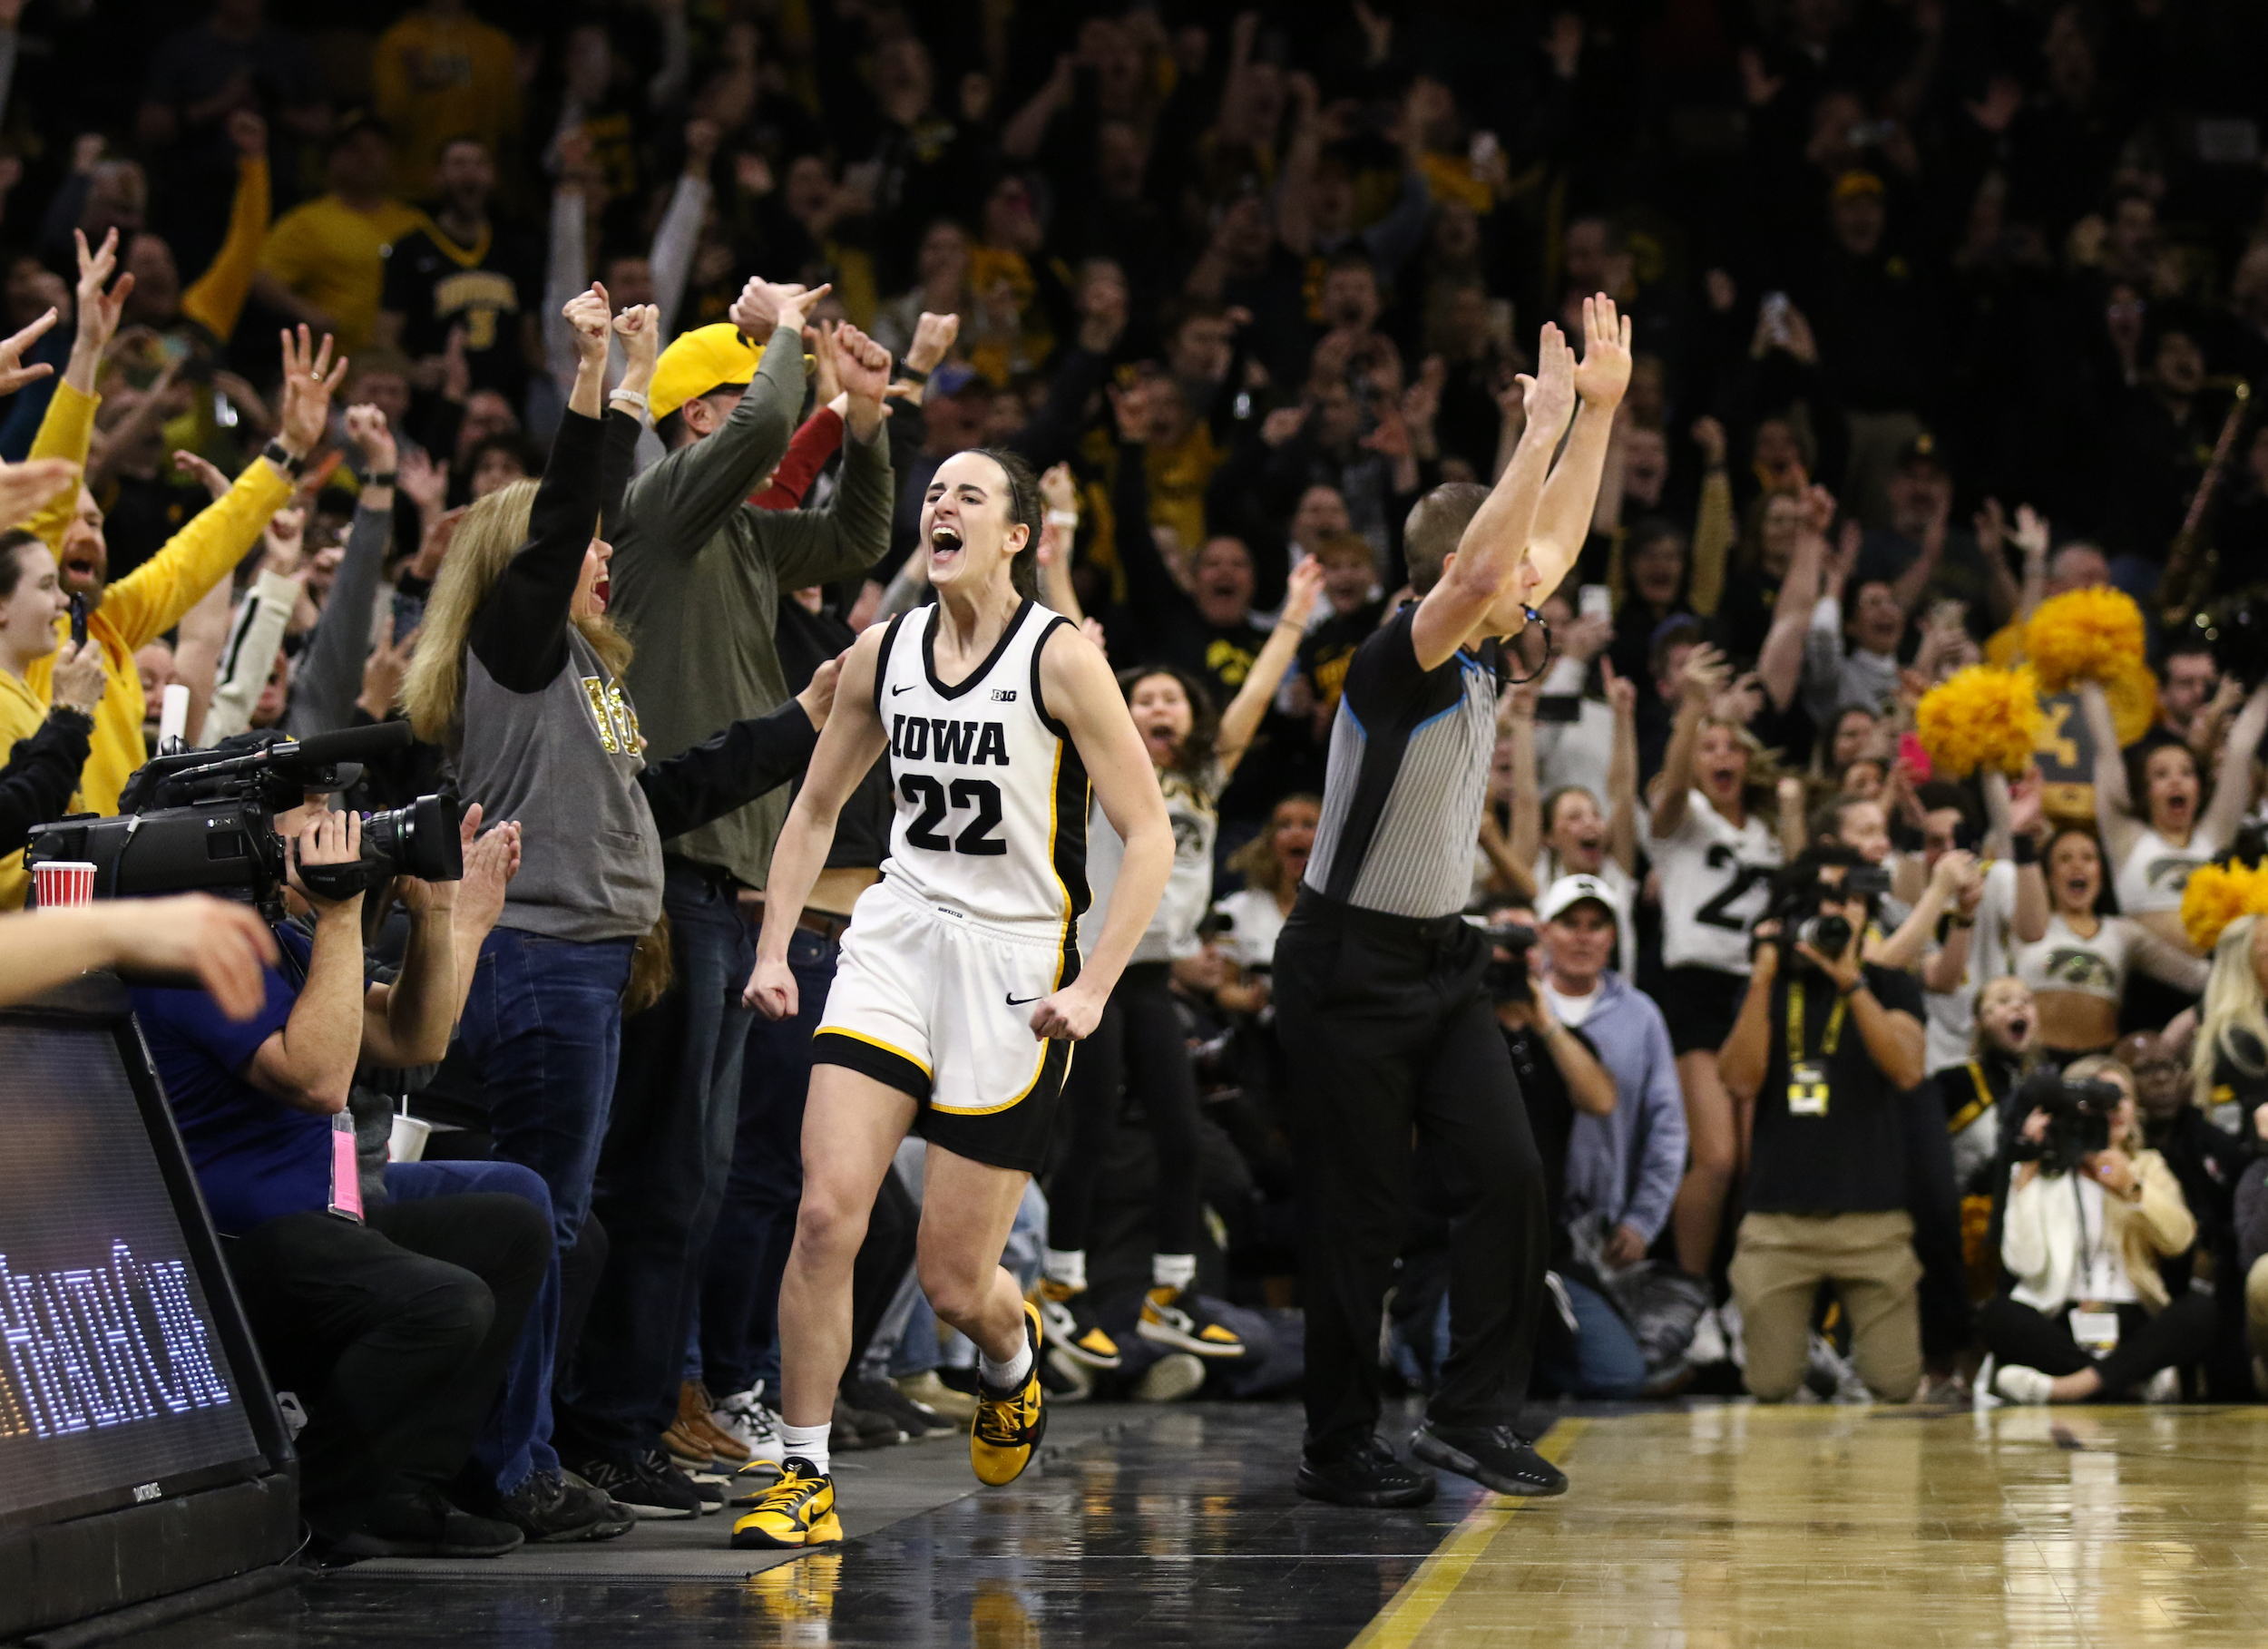 Guard Caitlin Clark #22 of the Iowa Hawkeyes celebrates after breaking the NCAA women's all-time scoring record during the first half against the Michigan Wolverines at Carver-Hawkeye Arena on February 15, 2024 in Iowa City, Iowa.